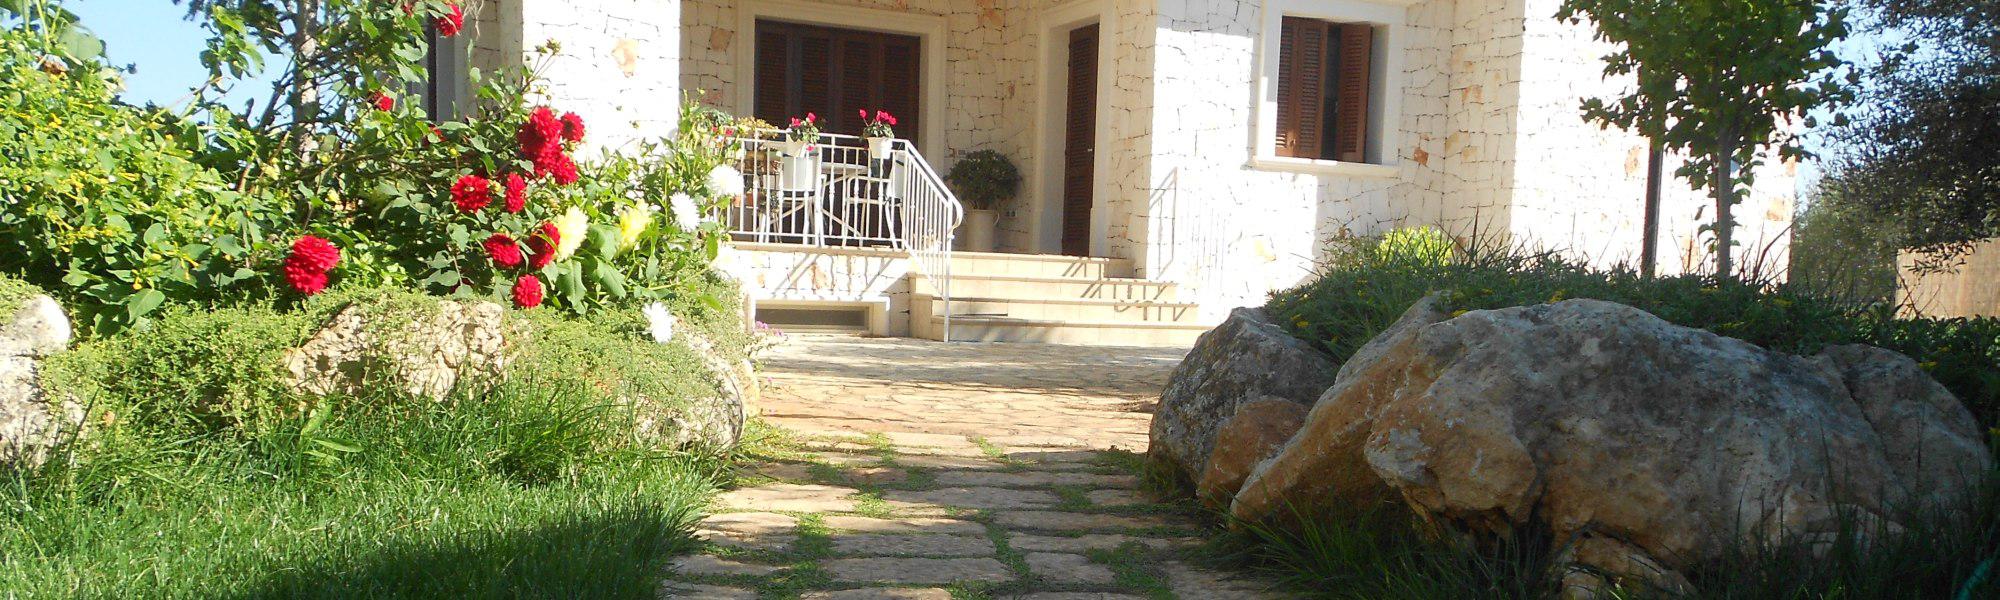 Best things to see and monuments in Ostuni, Puglia - Agriturismo Masseria Salento 19